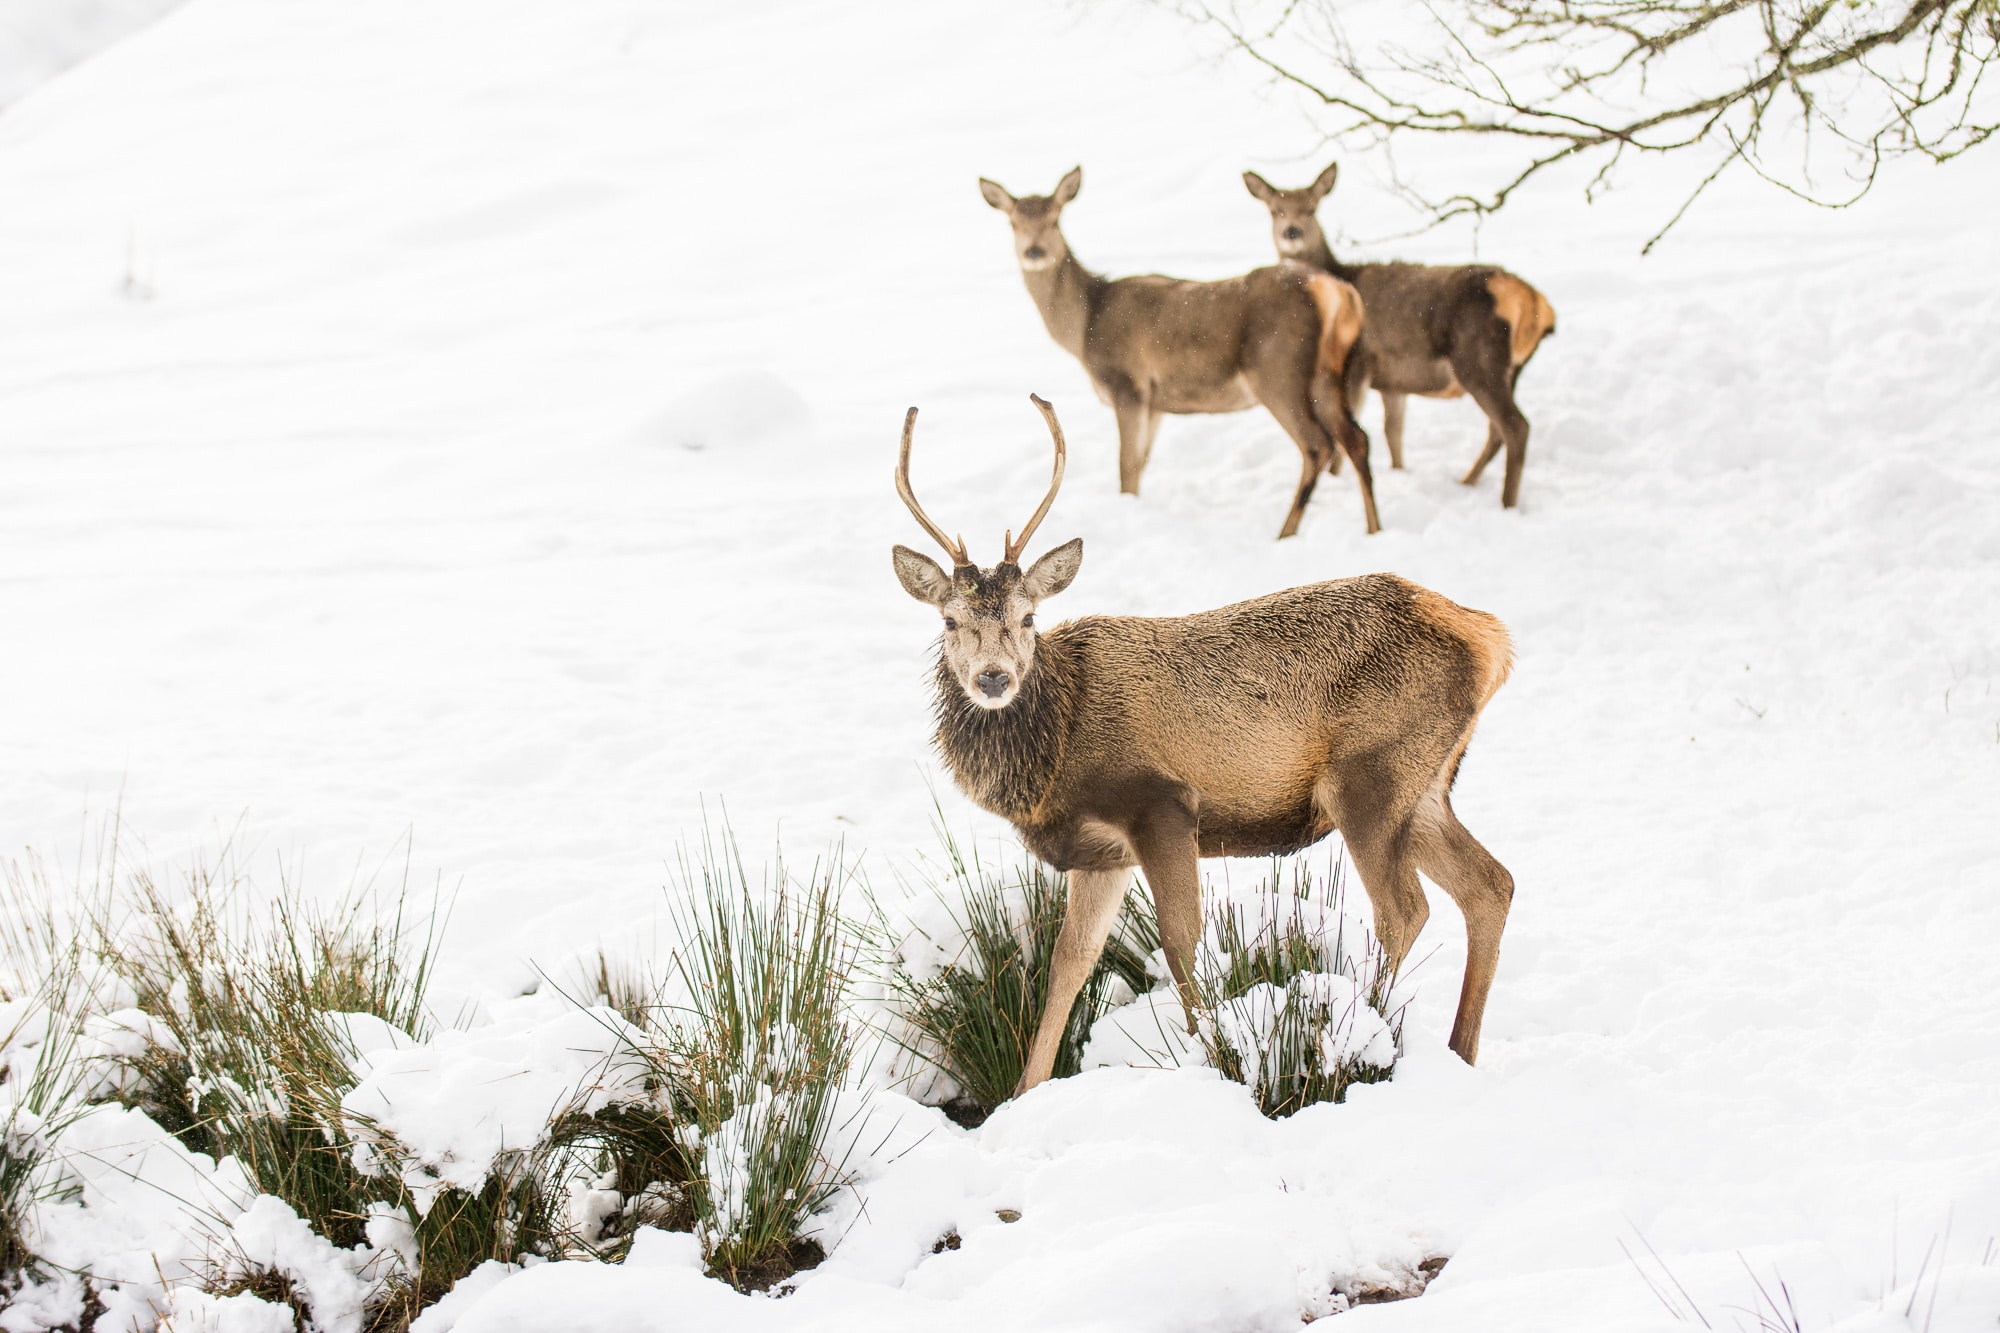 Wildlife holidays in Scotland - red deer family frolicking in the snow